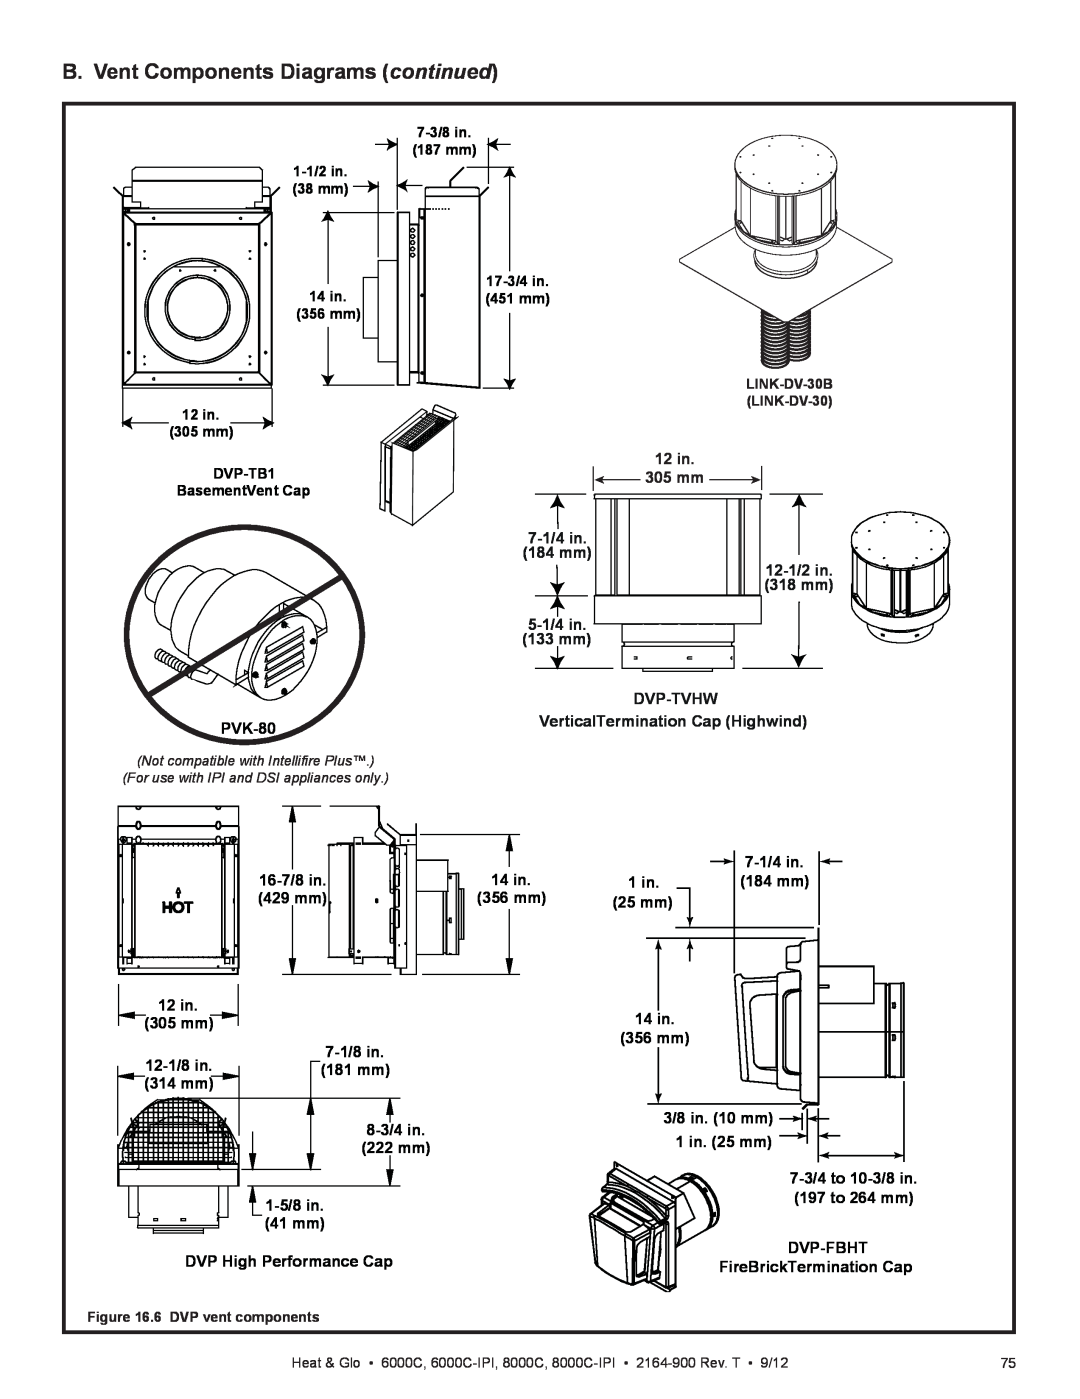 Heat & Glo LifeStyle 6000C manual B. Vent Components Diagrams continued, 12 in 